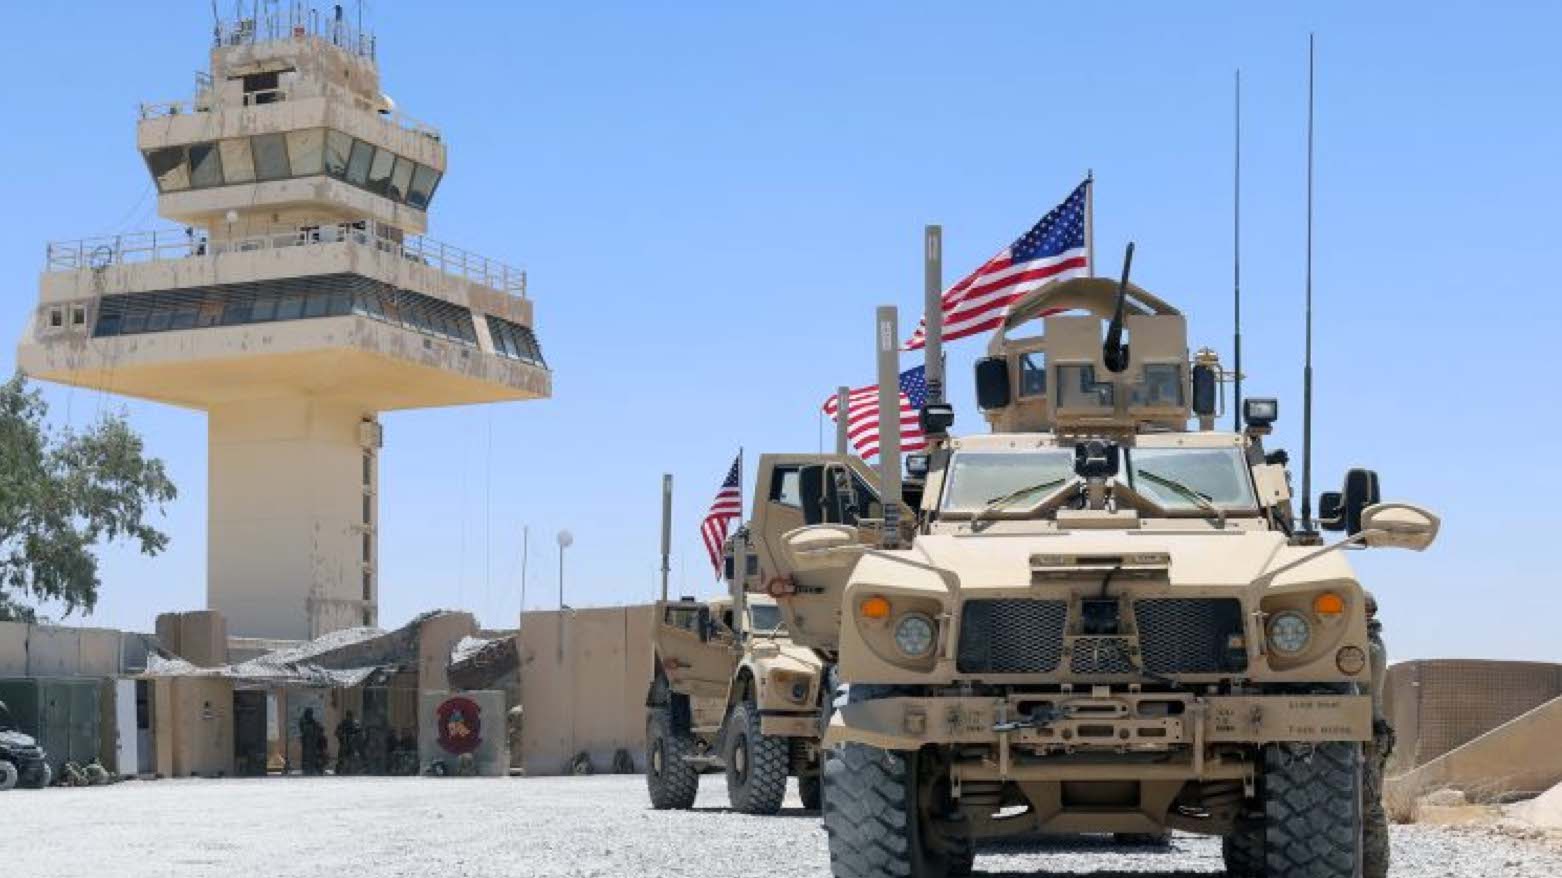 Airmen with the Security Forces Flight, 443rd Expeditionary Squadron, conduct a routine flight line patrol with U.S. flags at Al Asad Air Base on July 4, 2021. (Photo: Christie R. Smith/U.S. Army National Guard)